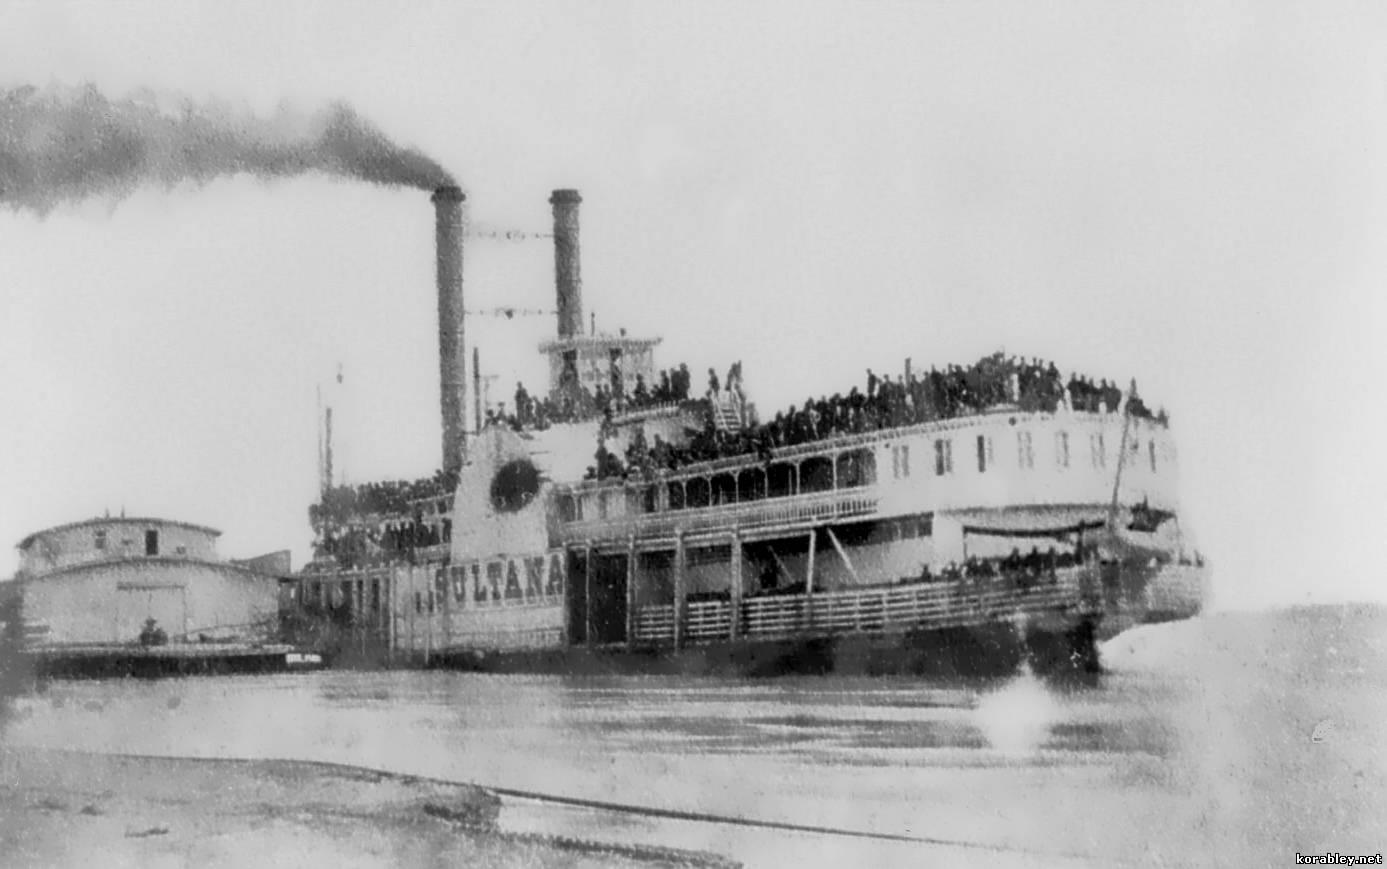 Incident with steamboat Sultana